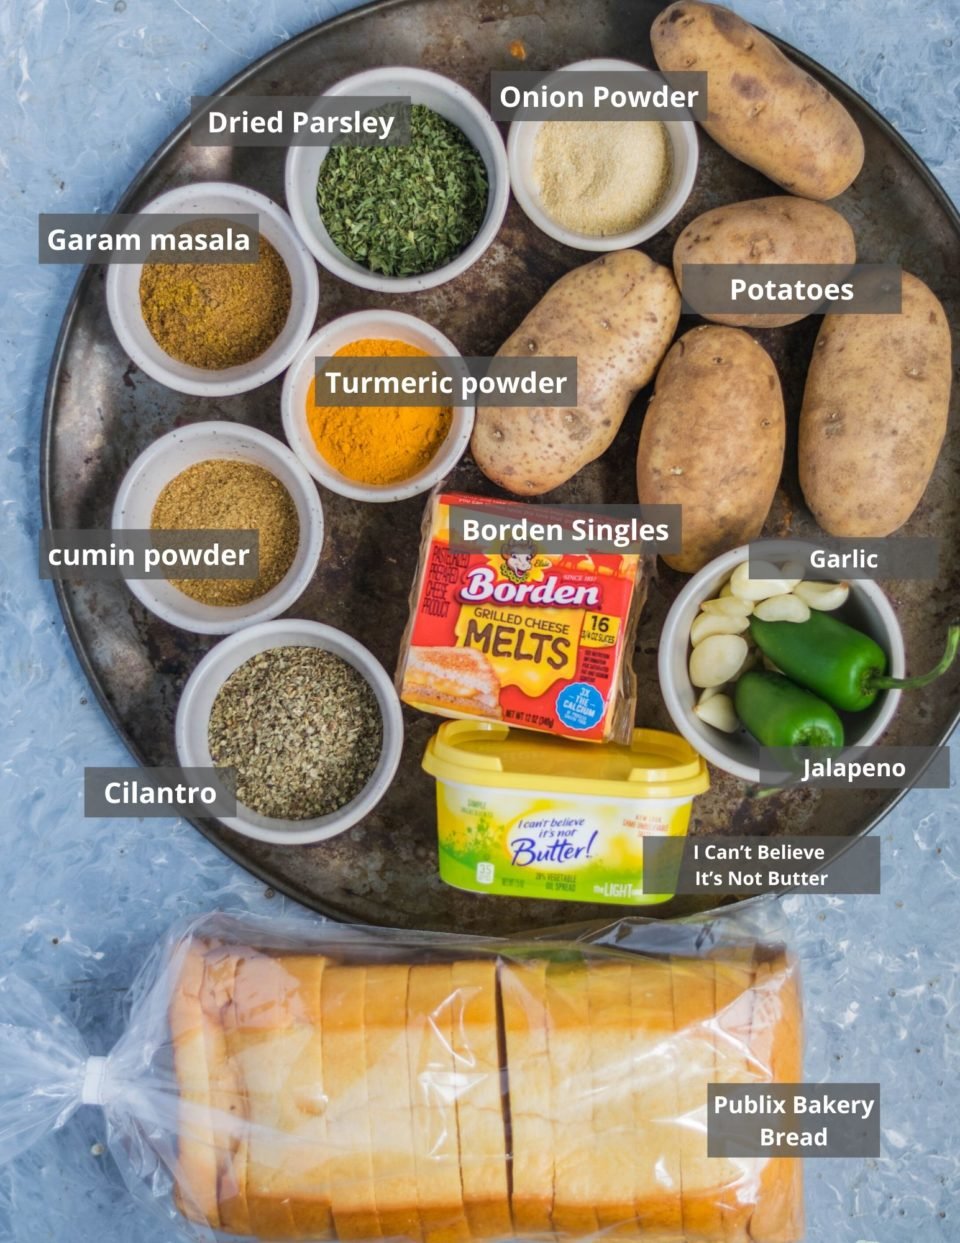 display of ingredients used to make Mashed Potato Cheese Sandwich